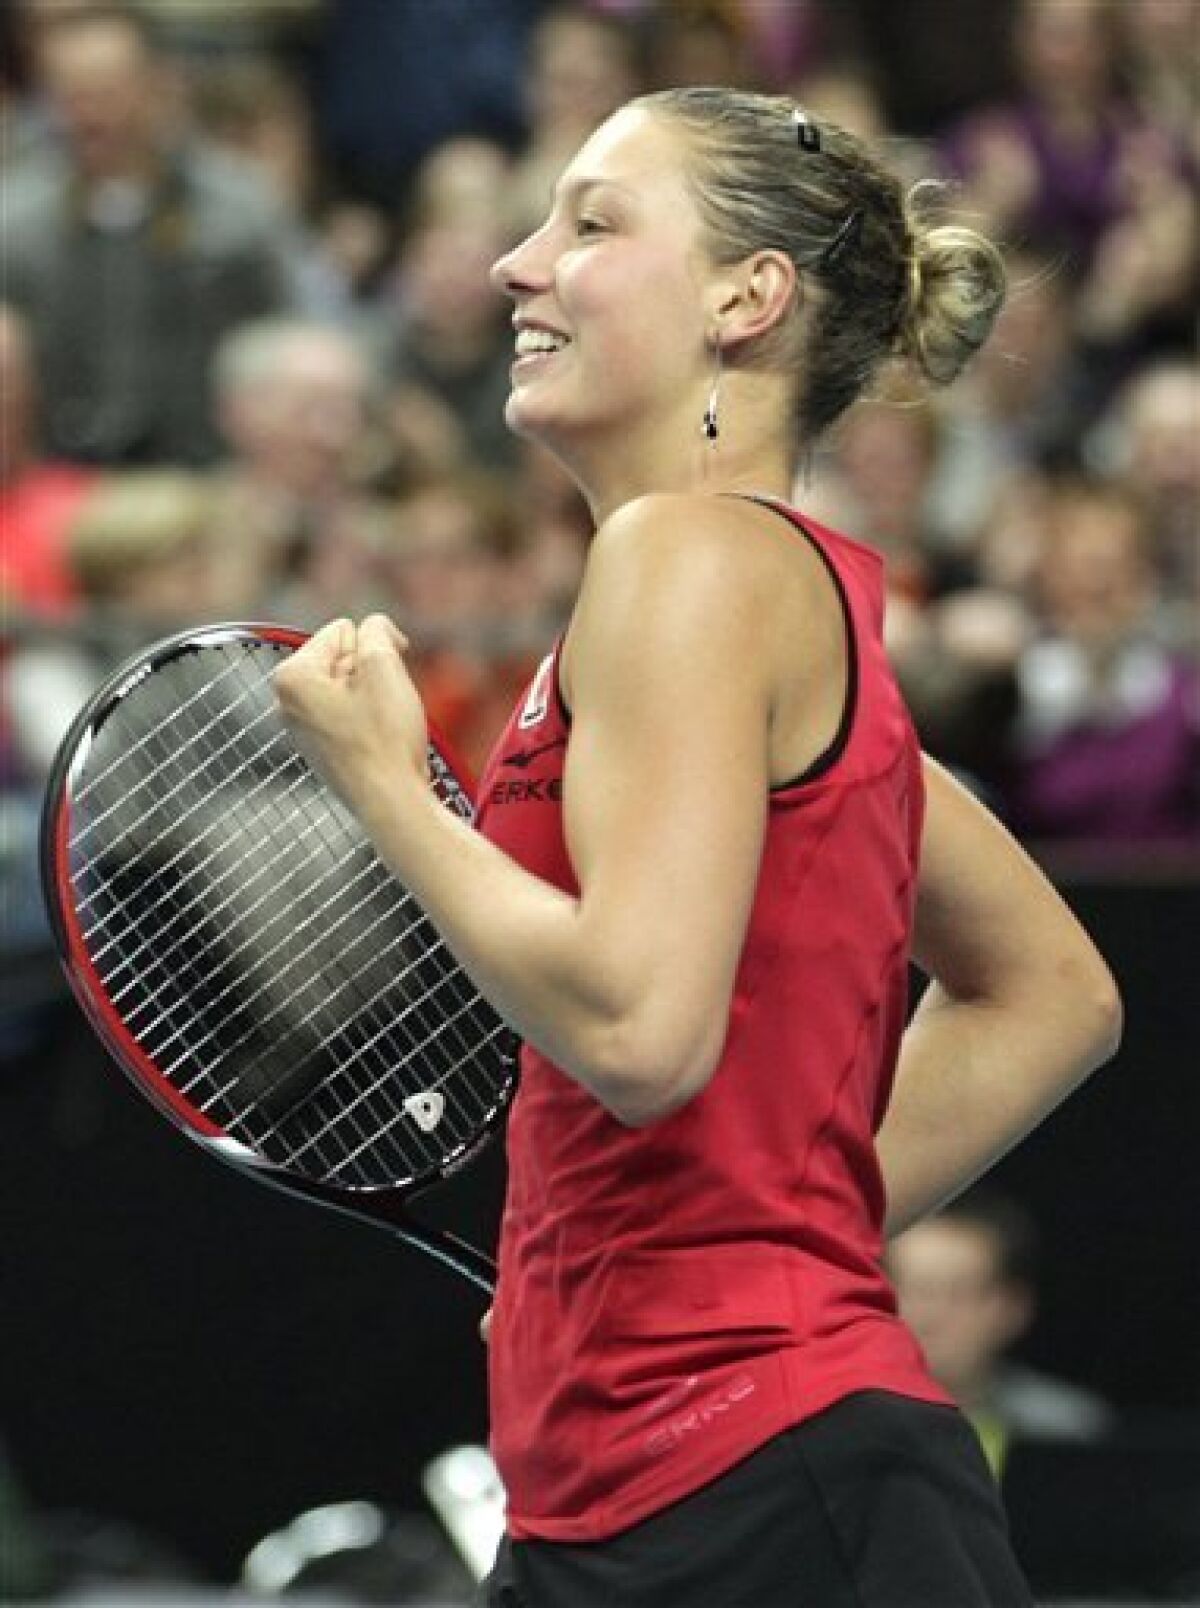 Belgium's Yanina Wickmayer celebrates defeating US player Bethanie Mattek-Sands during the World Group Fed Cup match in Antwerp, Belgium, Saturday, Feb. 5, 2011. (AP Photo/Yves Logghe)